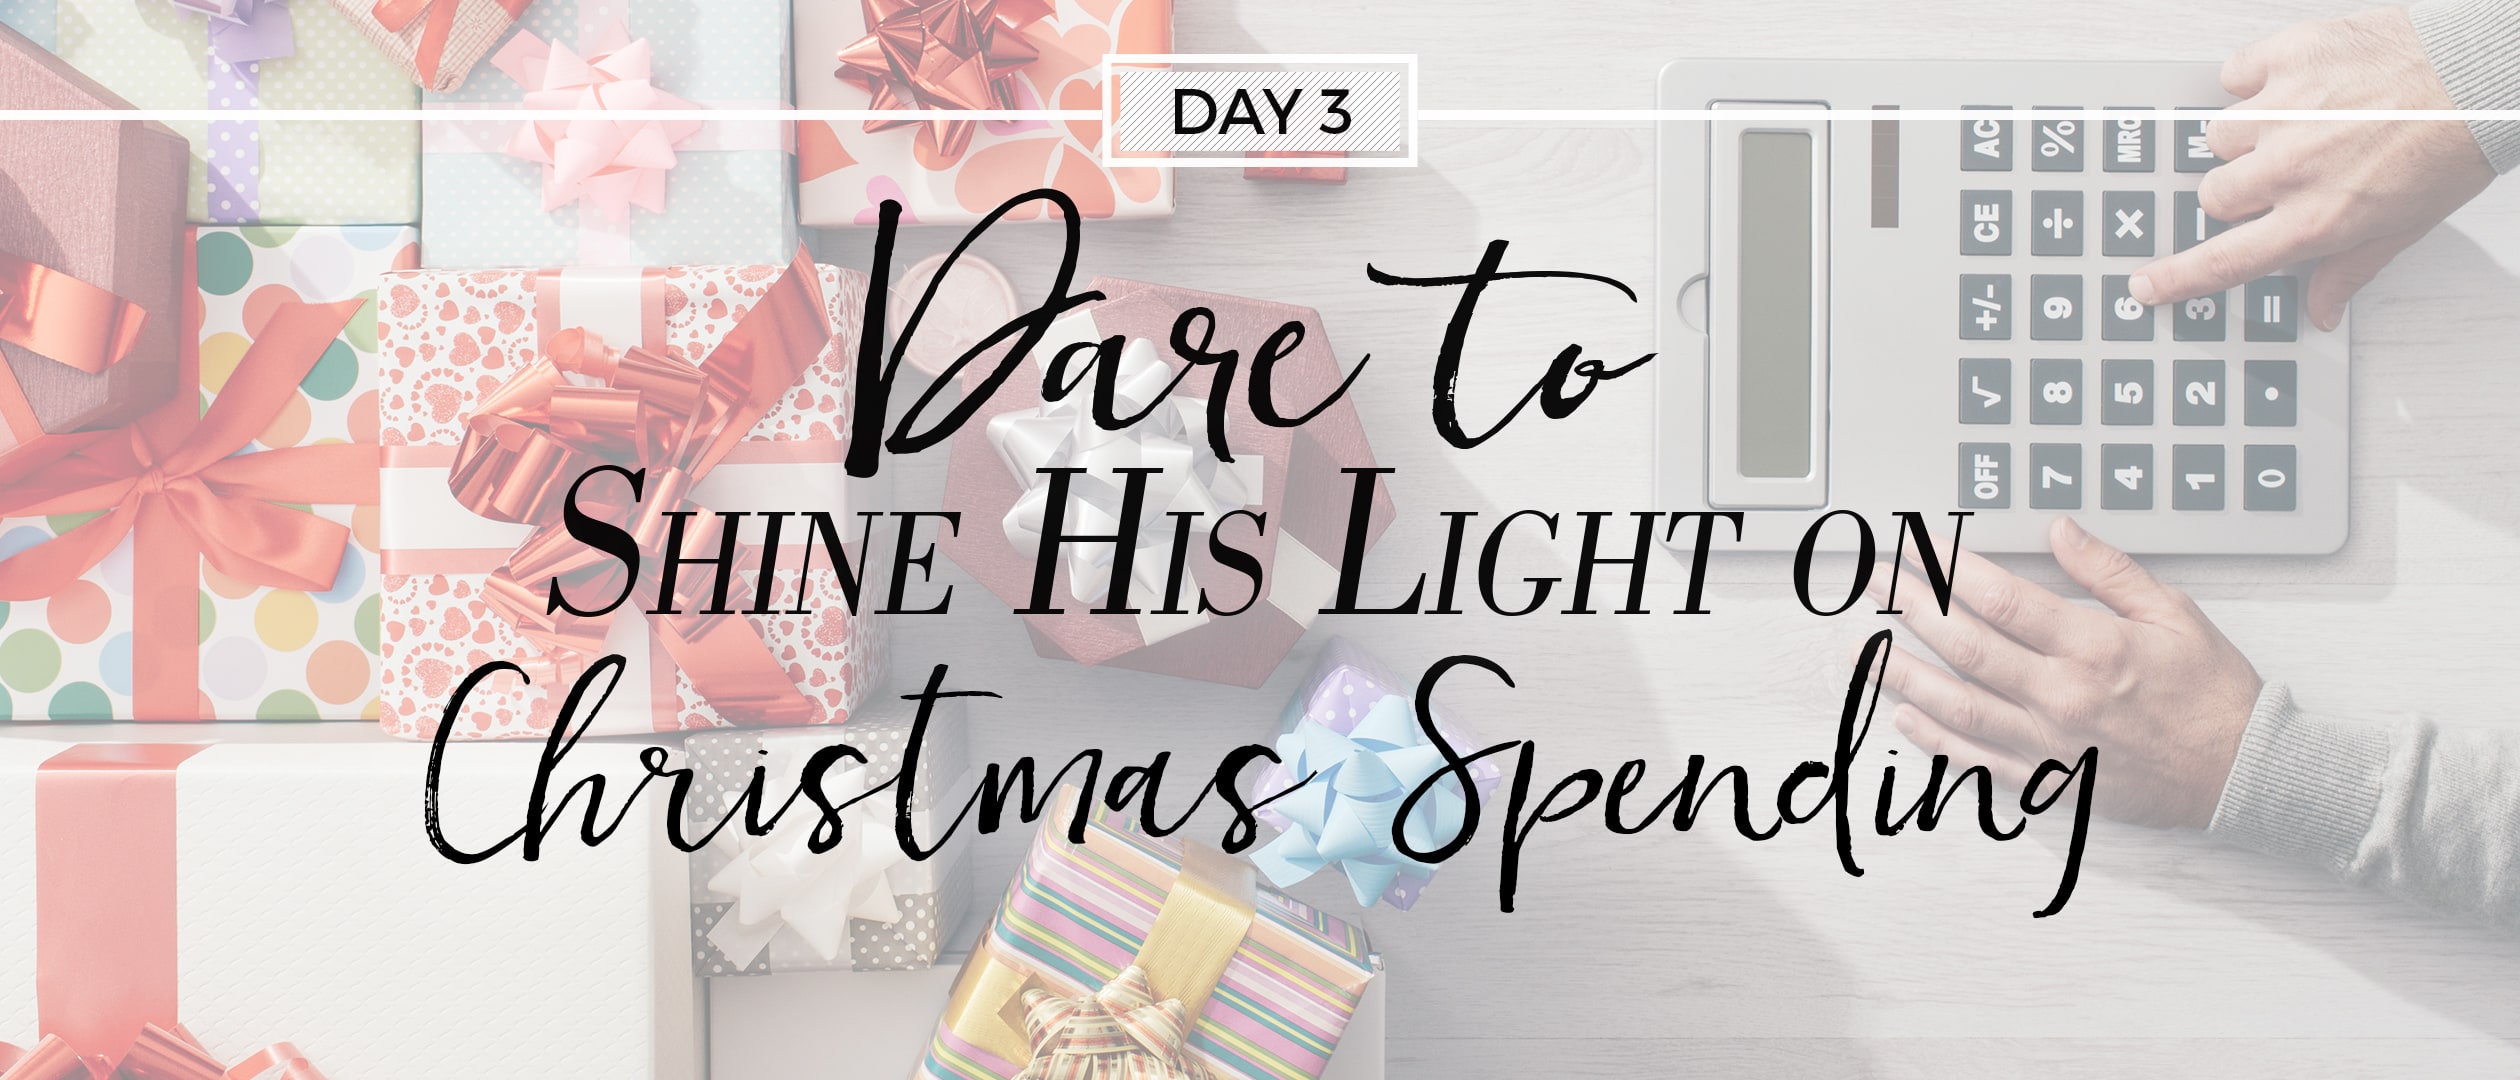 Day 3: Dare to Shine His Light on Christmas Spending